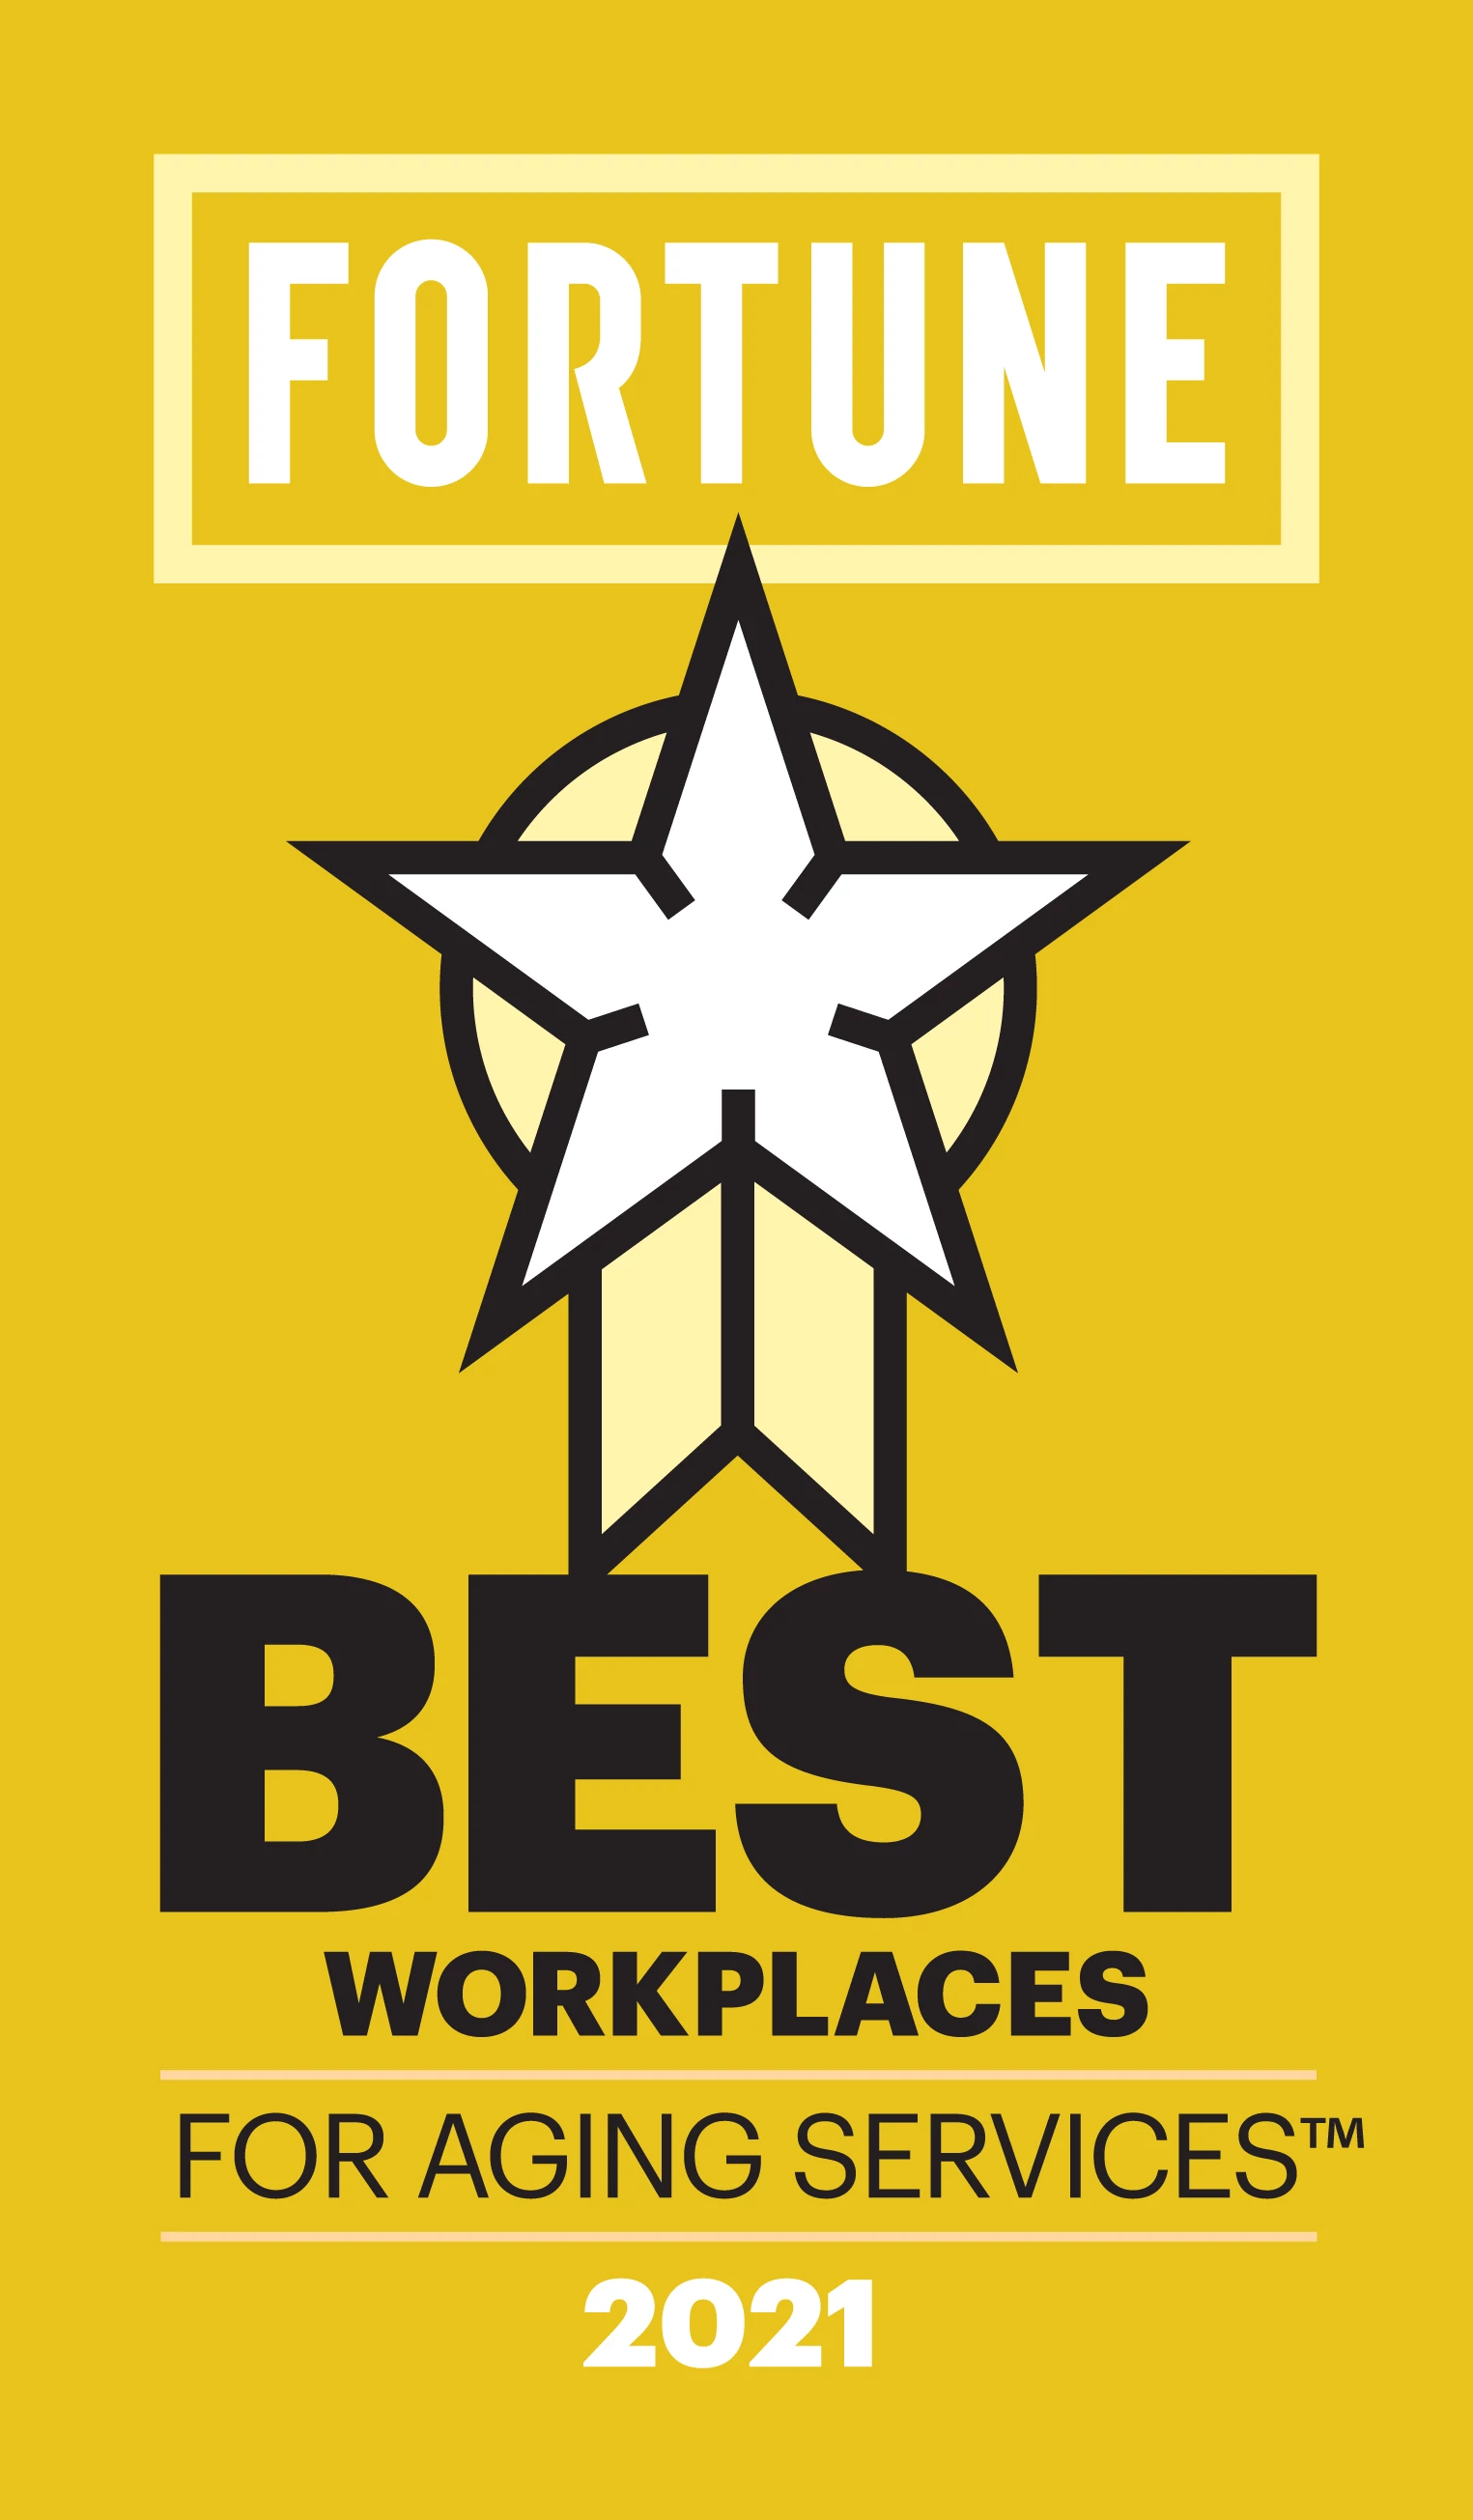 FORTUNE Magazine Best Place to Work in Aging Services